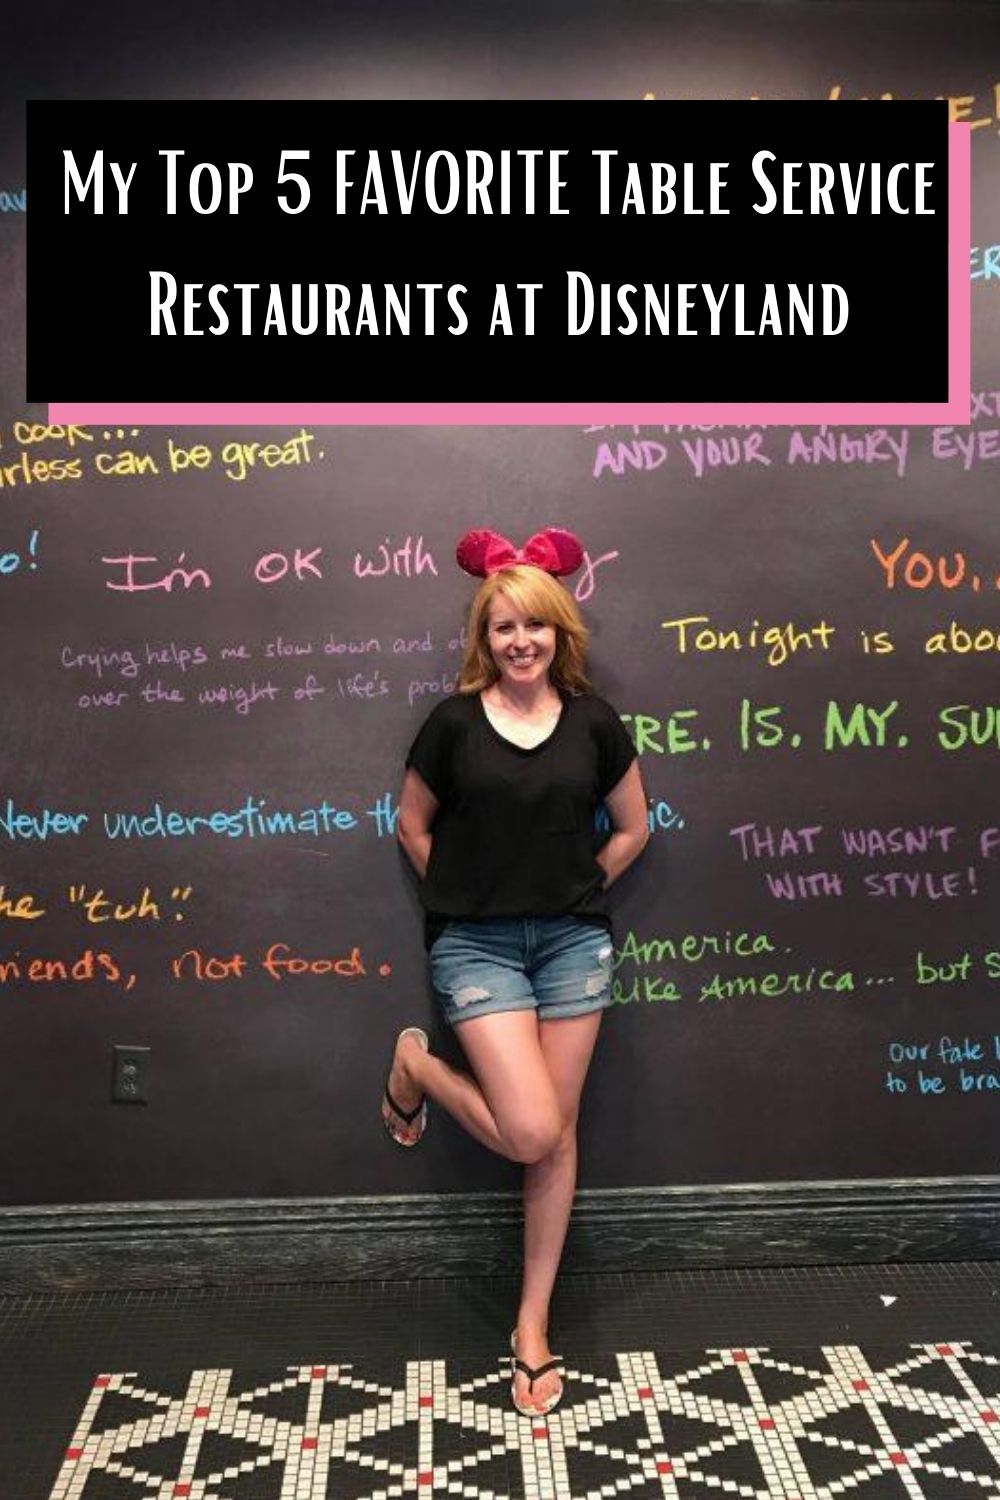 Here are my favorite restaurants to grab a meal at Disneyland! #disneyland #dl #disney #disneyfood #restaurants